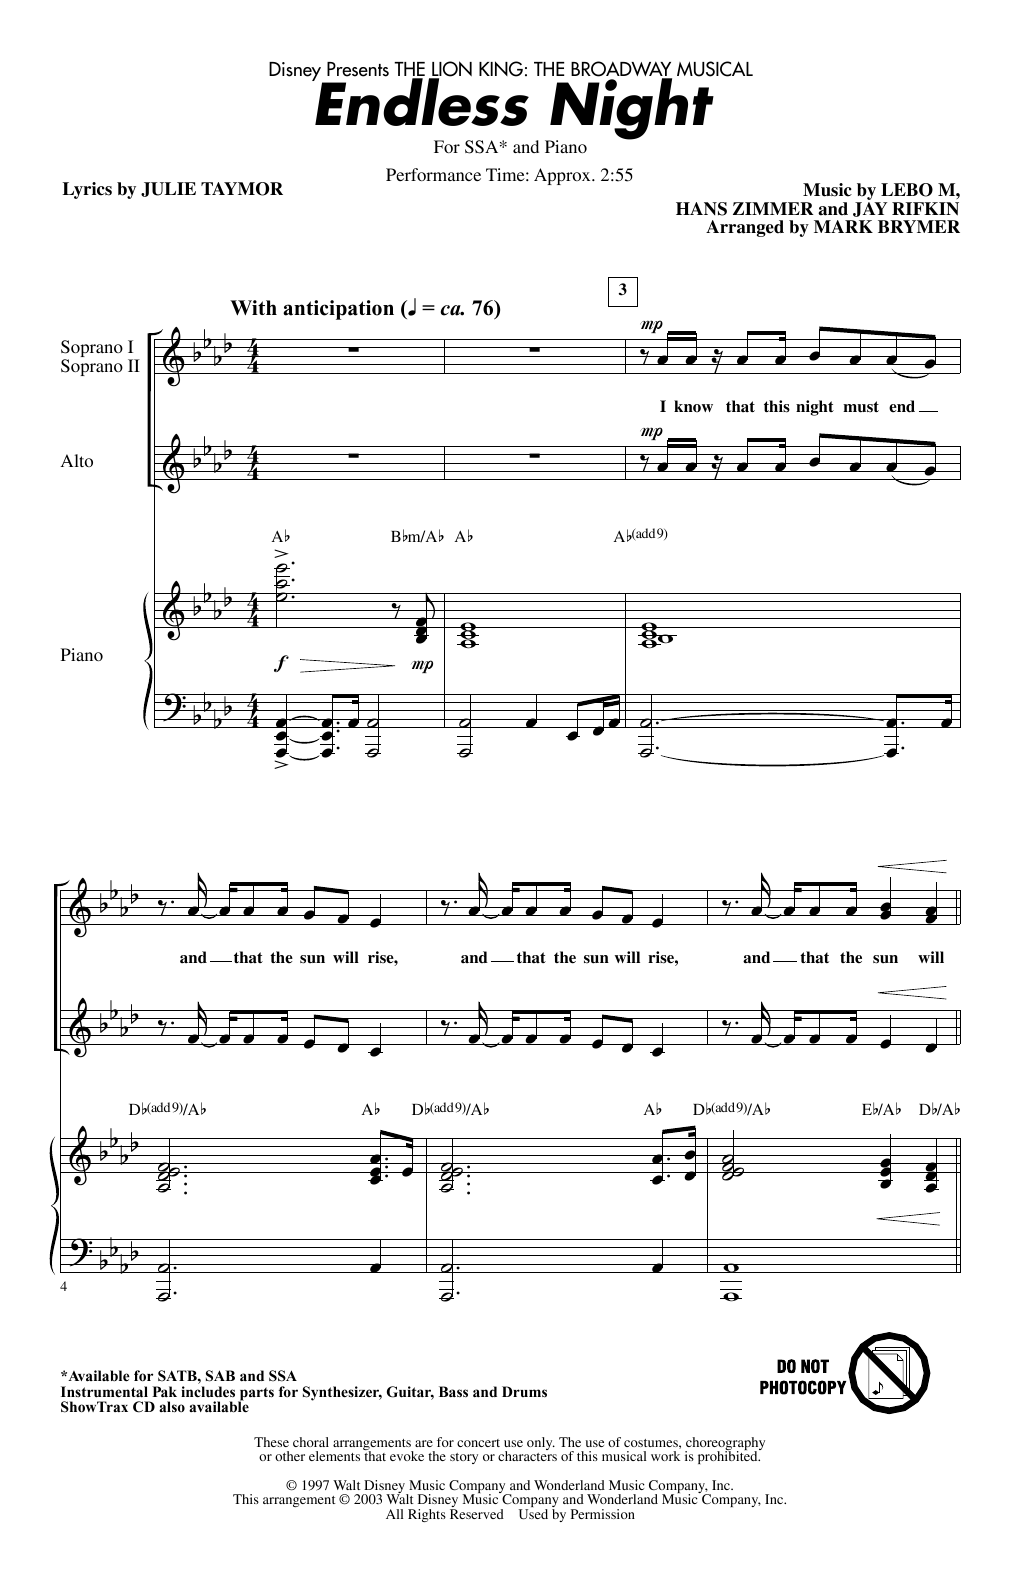 Lebo M., Hans Zimmer, Jay Rifkin and Julie Taymor Endless Night (from The Lion King: Broadway Musical) (arr. Mark Brymer) sheet music notes and chords arranged for SATB Choir